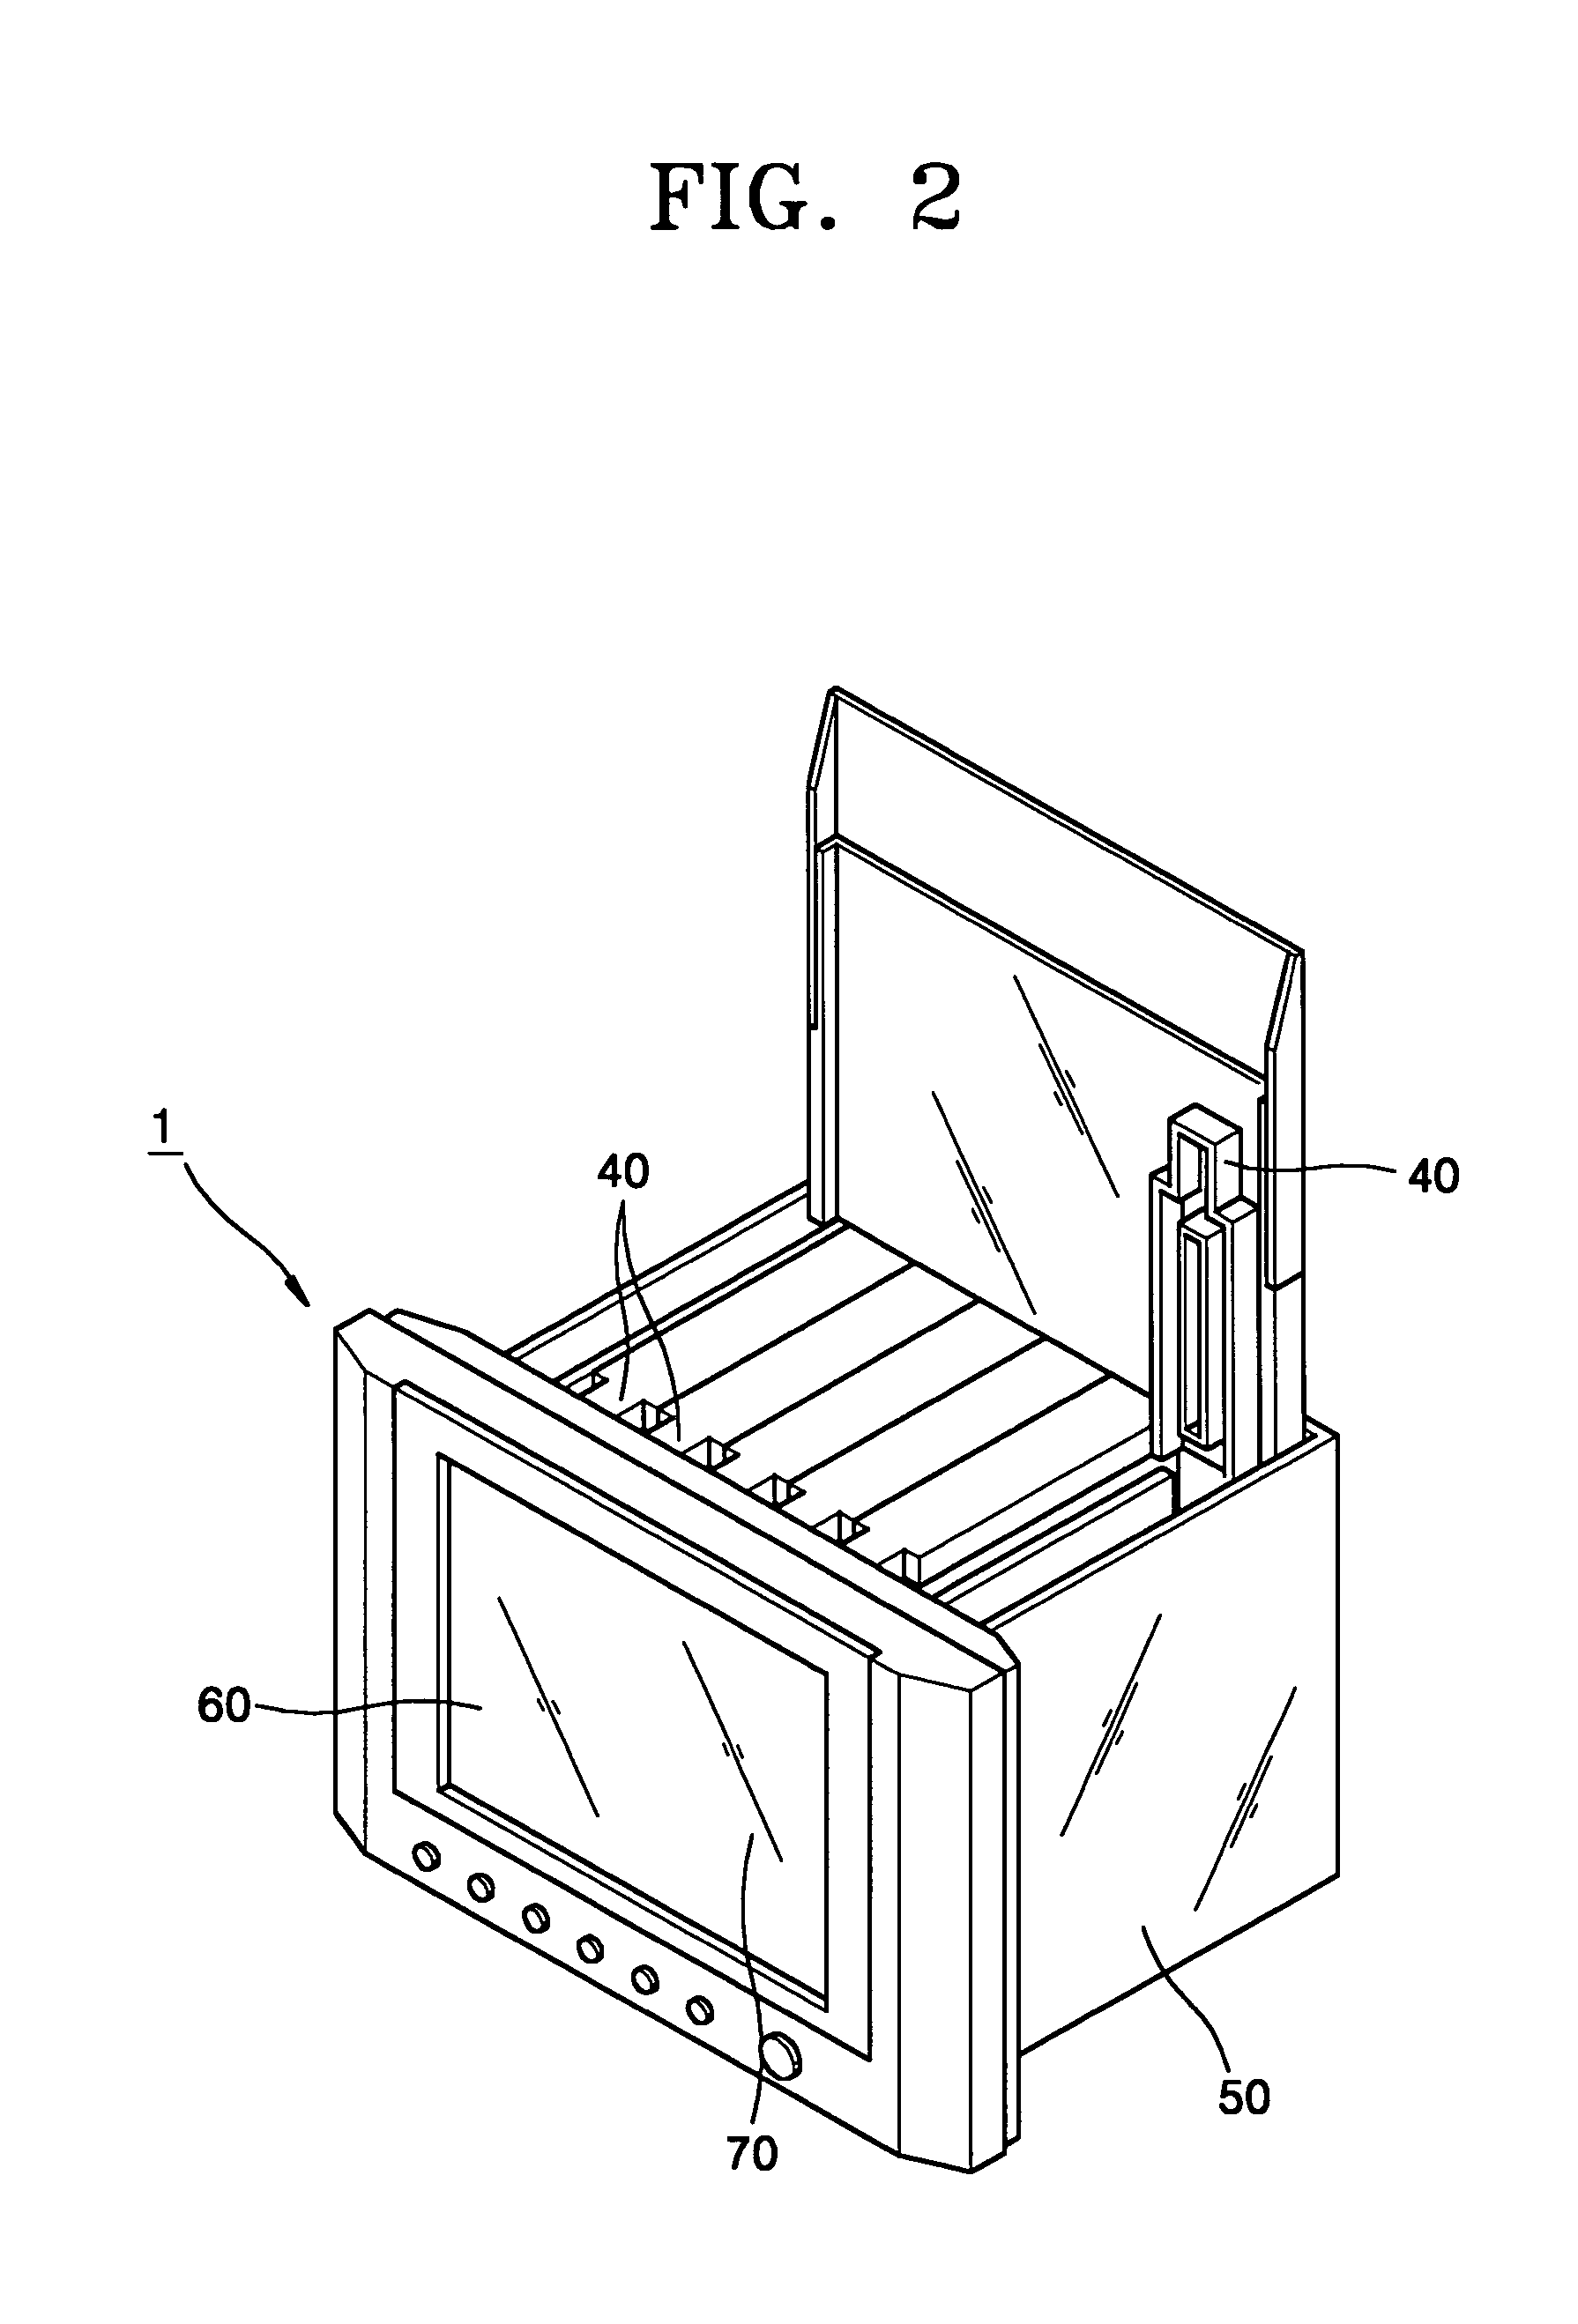 Real-time PCR monitoring apparatus and method